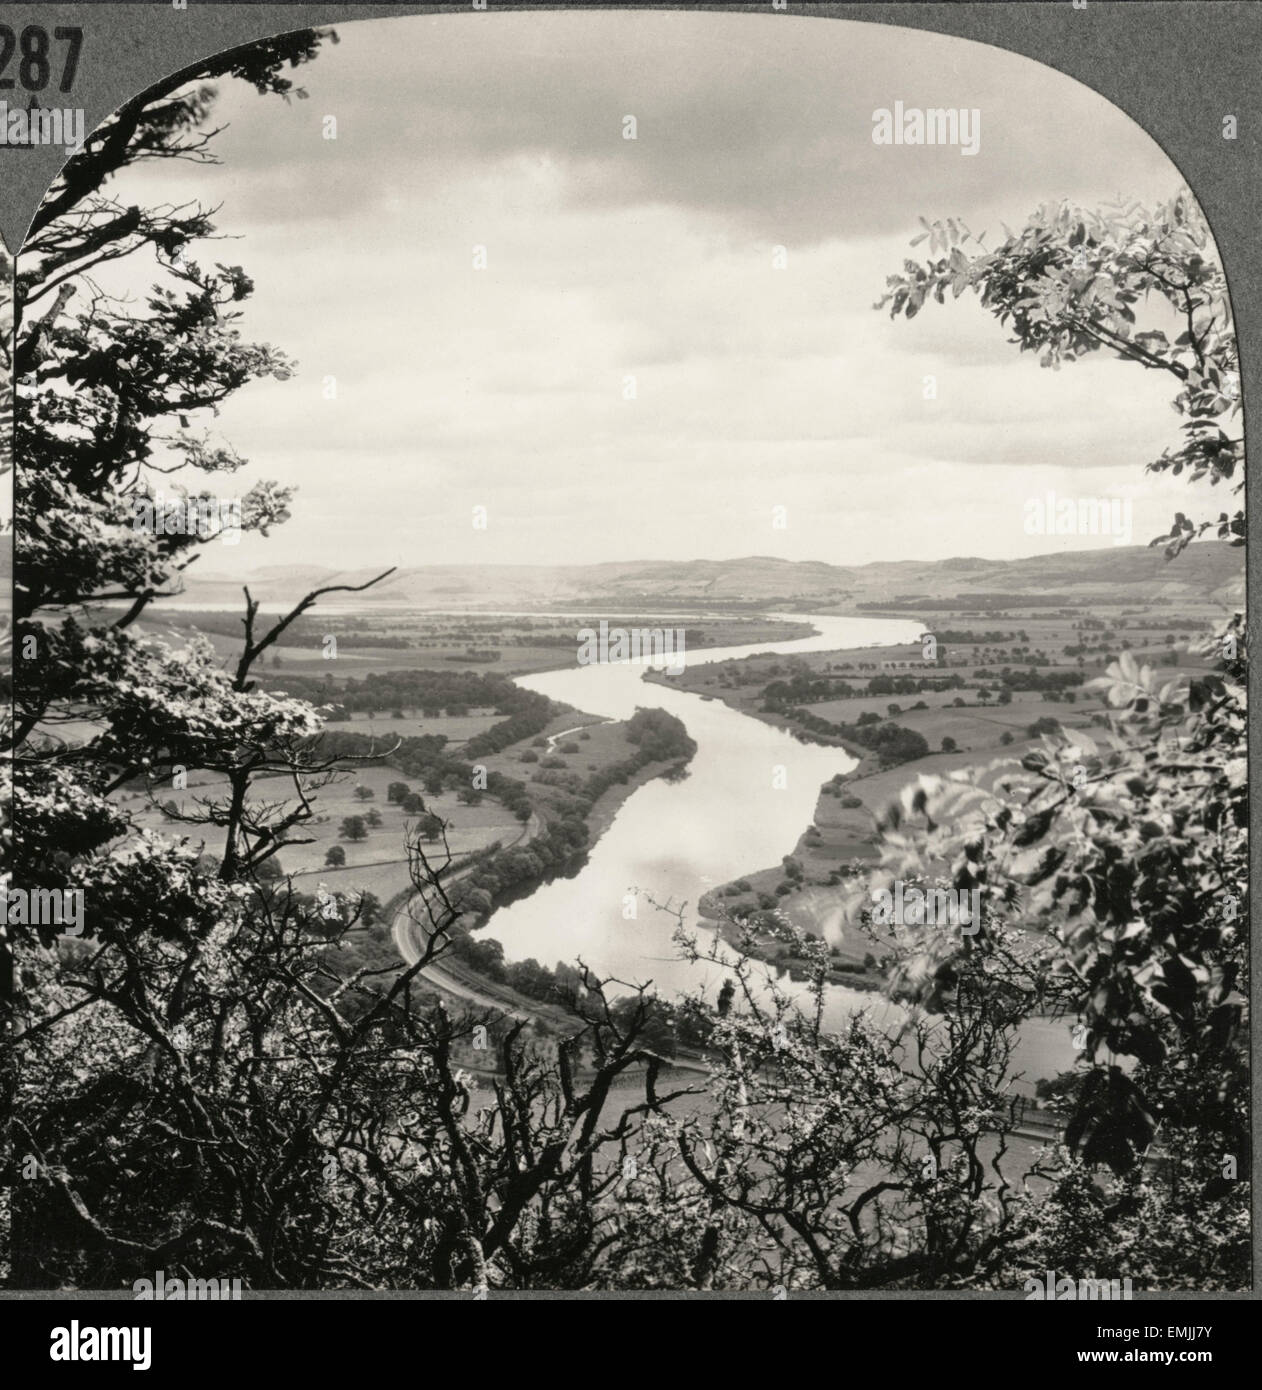 Overlooking the Beautiful Valley of the Tay, Scotland, UK, Single Image of Stereo Card, circa 1900 Stock Photo